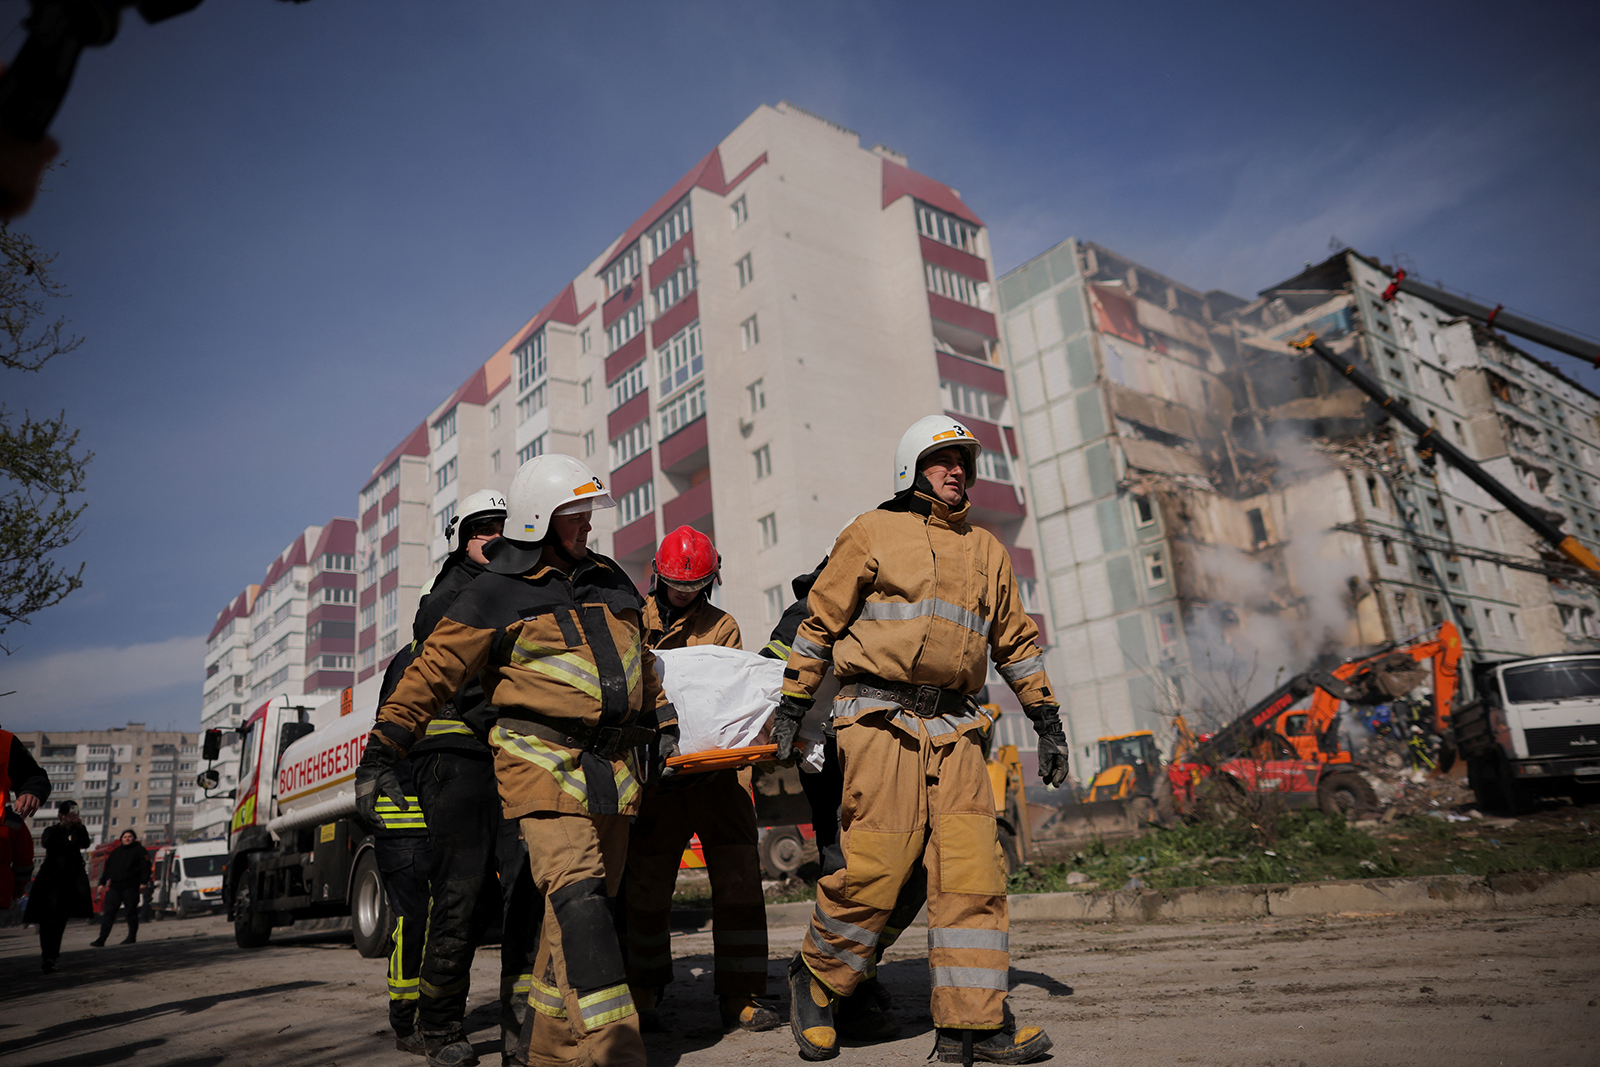 Rescuers carry the body of a victim as they work at the site of a heavily damaged residential building hit by a Russian missilein in Uman, Cherkasy region, Ukraine on April 28.